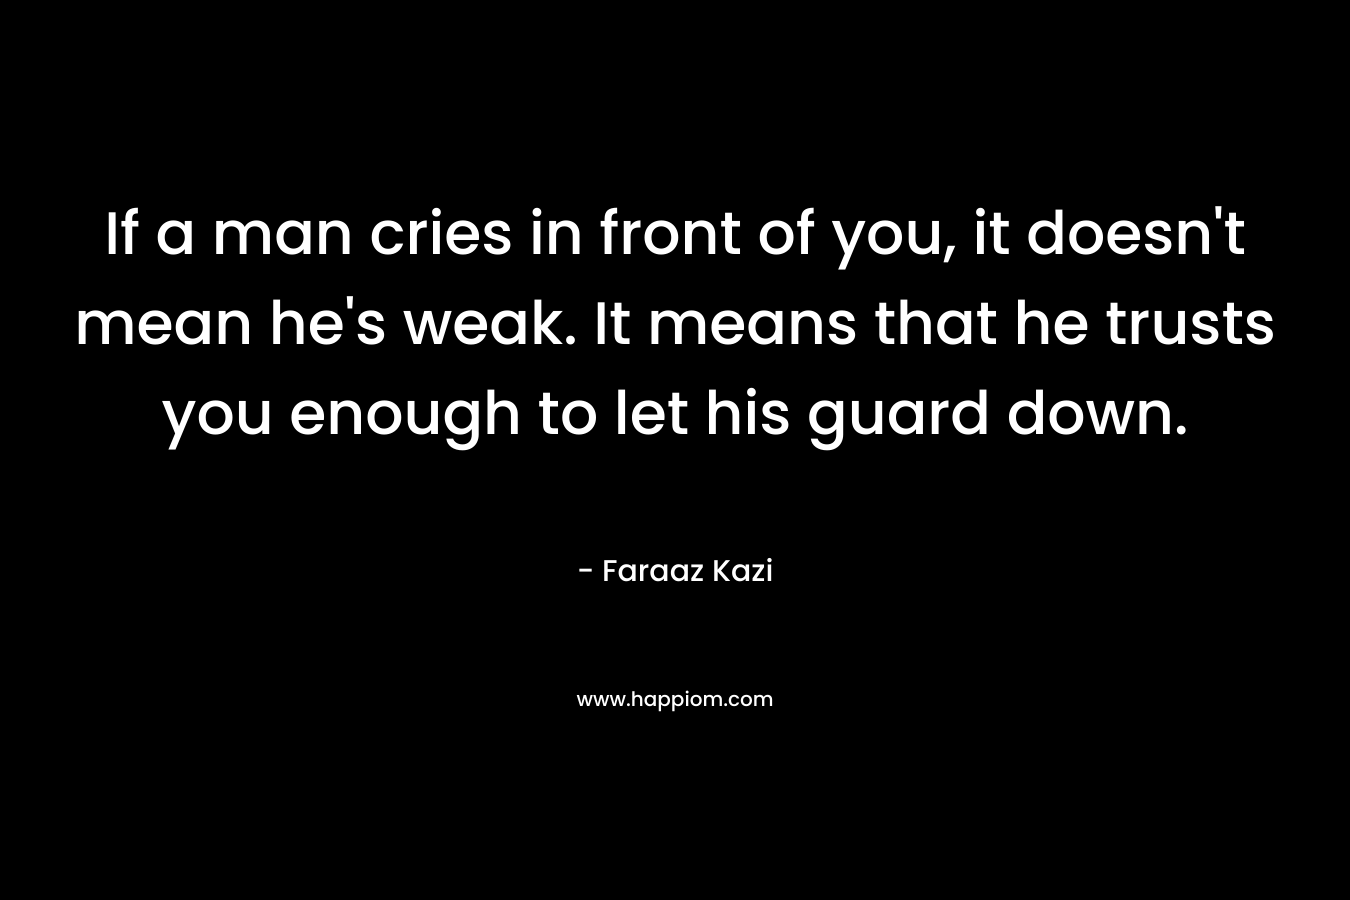 If a man cries in front of you, it doesn't mean he's weak. It means that he trusts you enough to let his guard down.